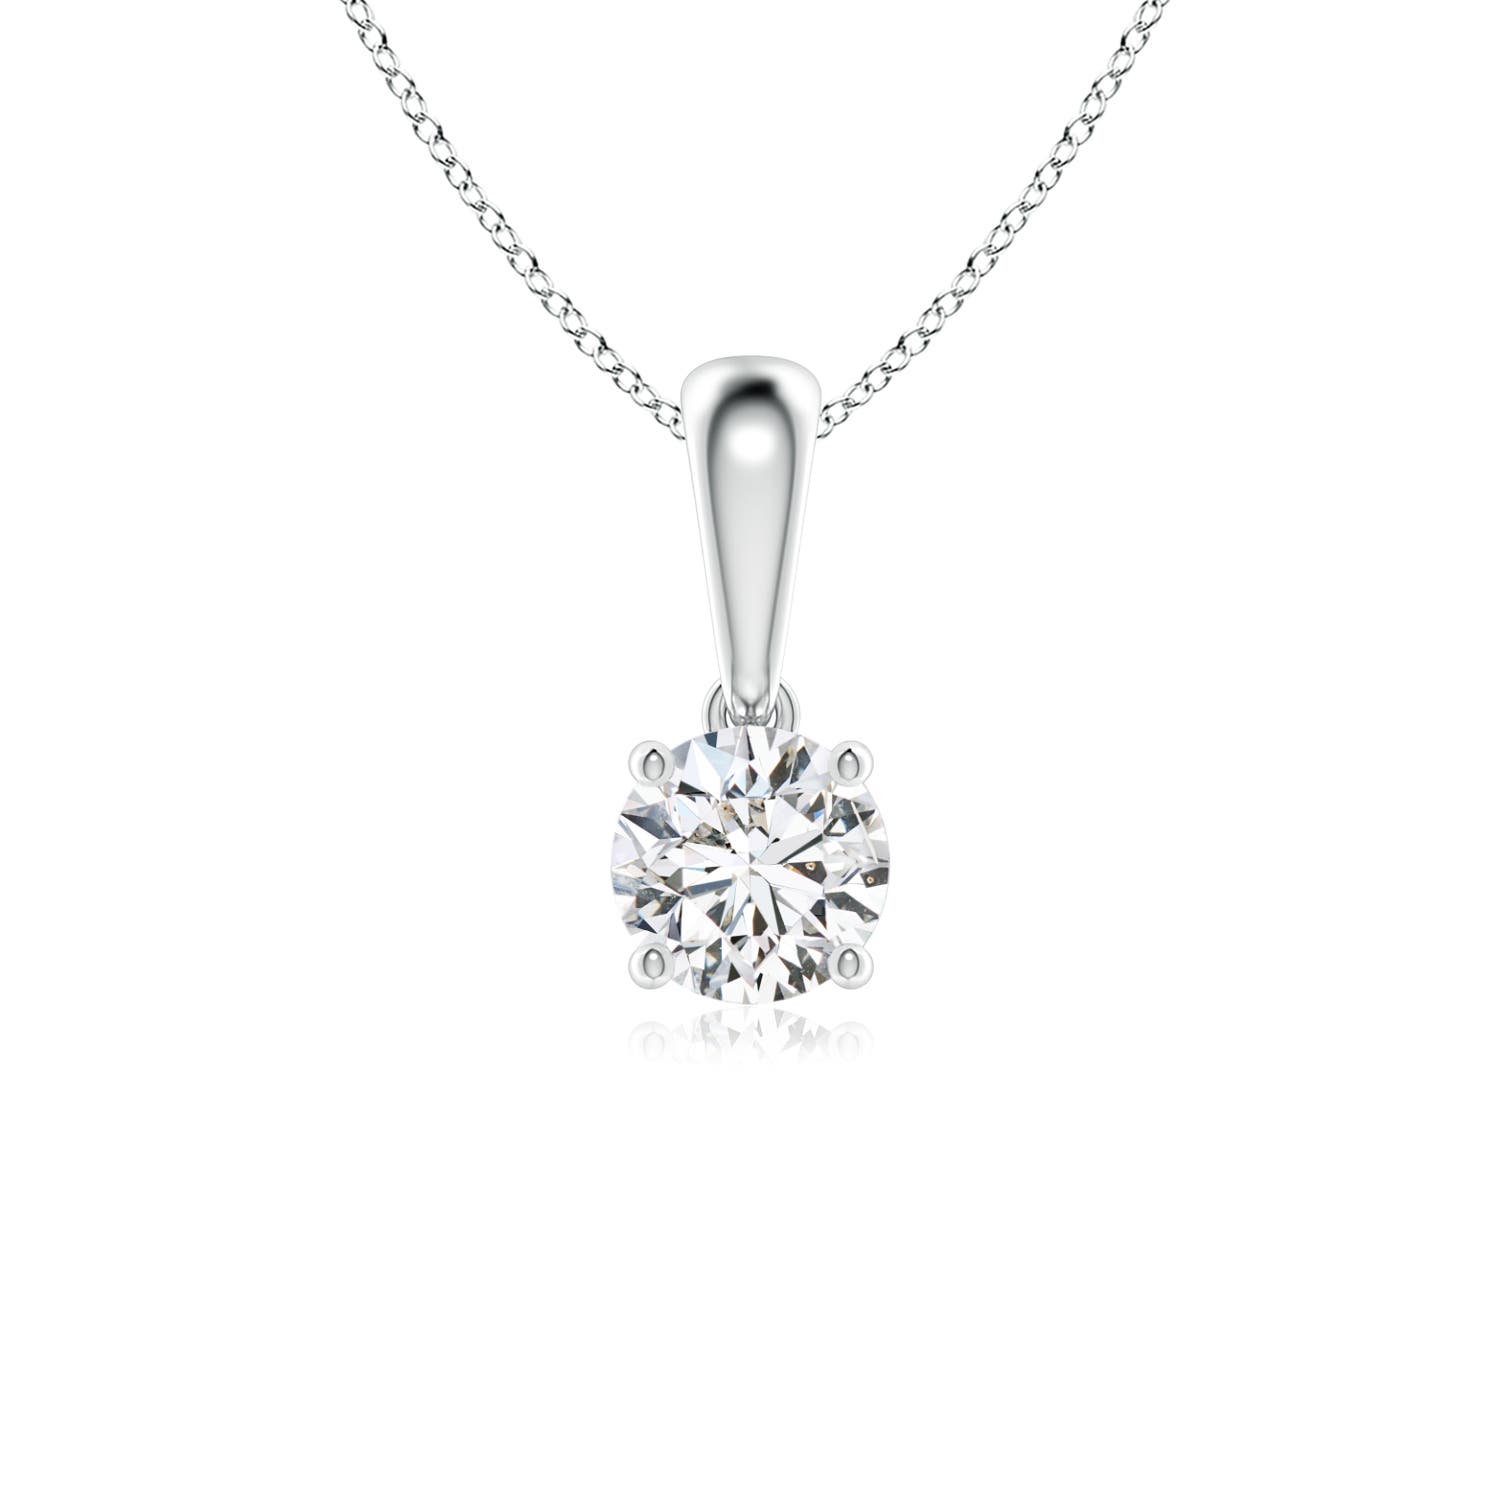 H, SI2 / 0.33 CT / 14 KT White Gold